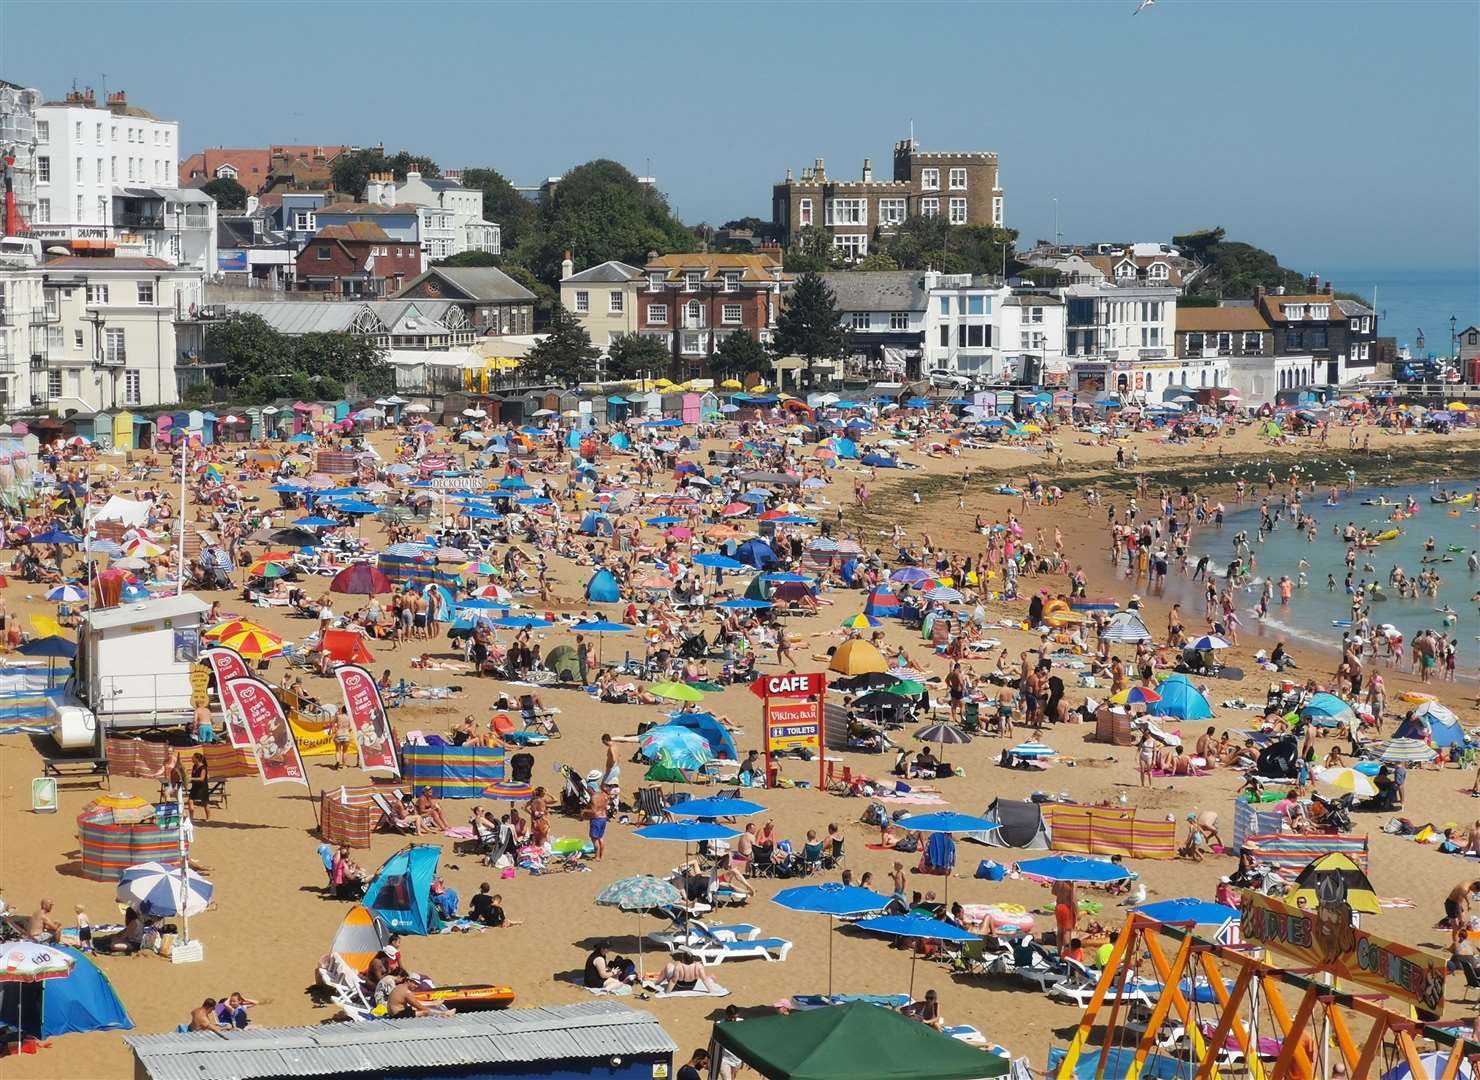 The county's beaches are sure to be busy as the warm weather continues